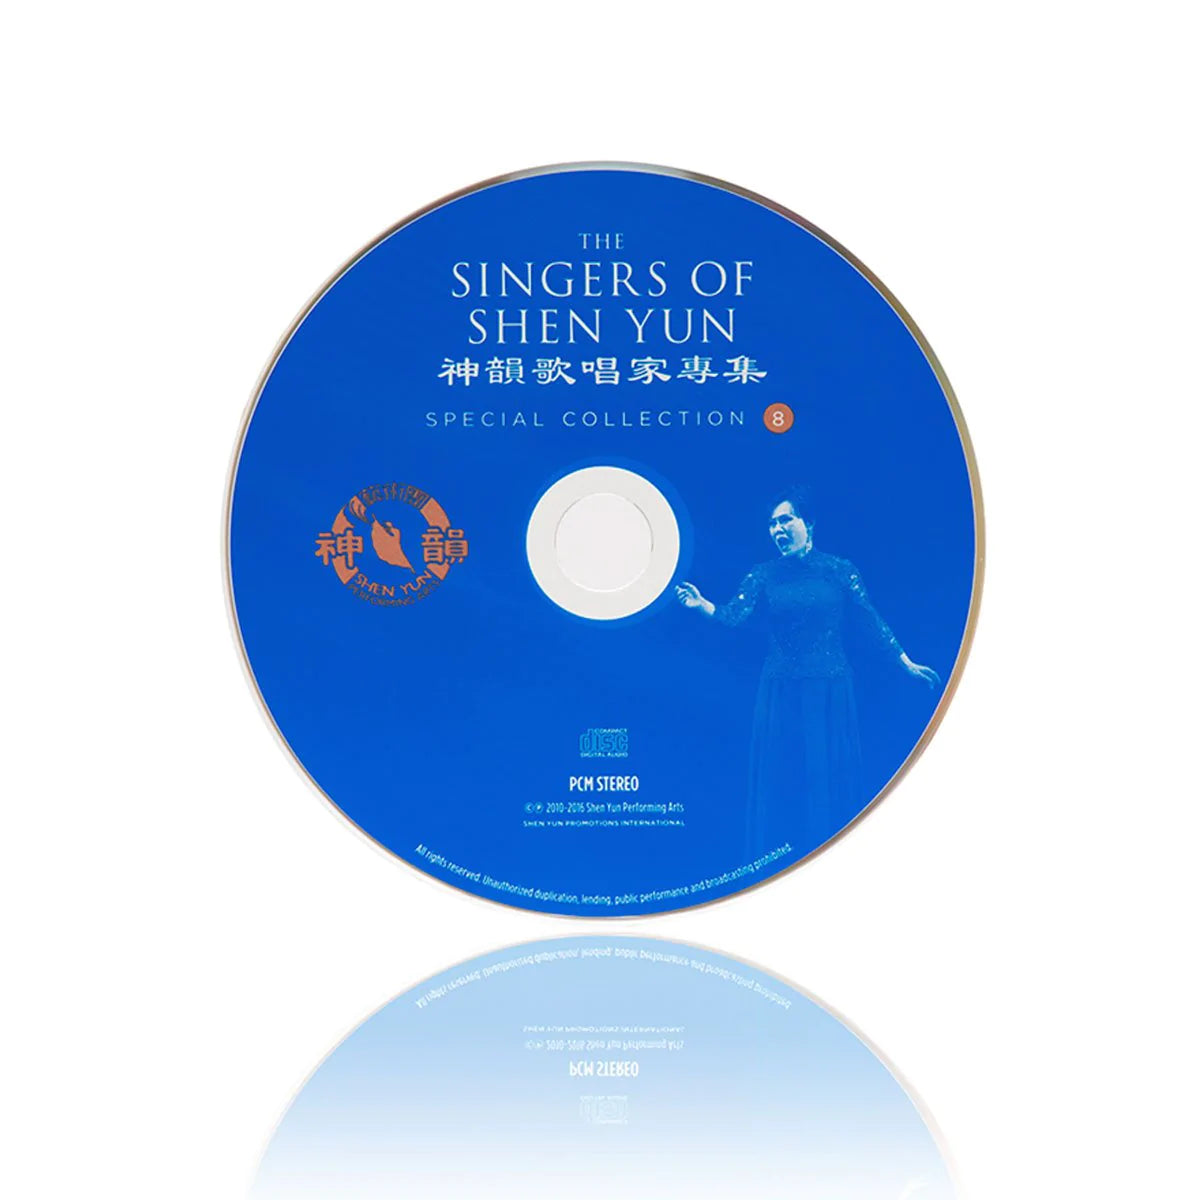 The Singers of Shen Yun: Special Collection - No. 8